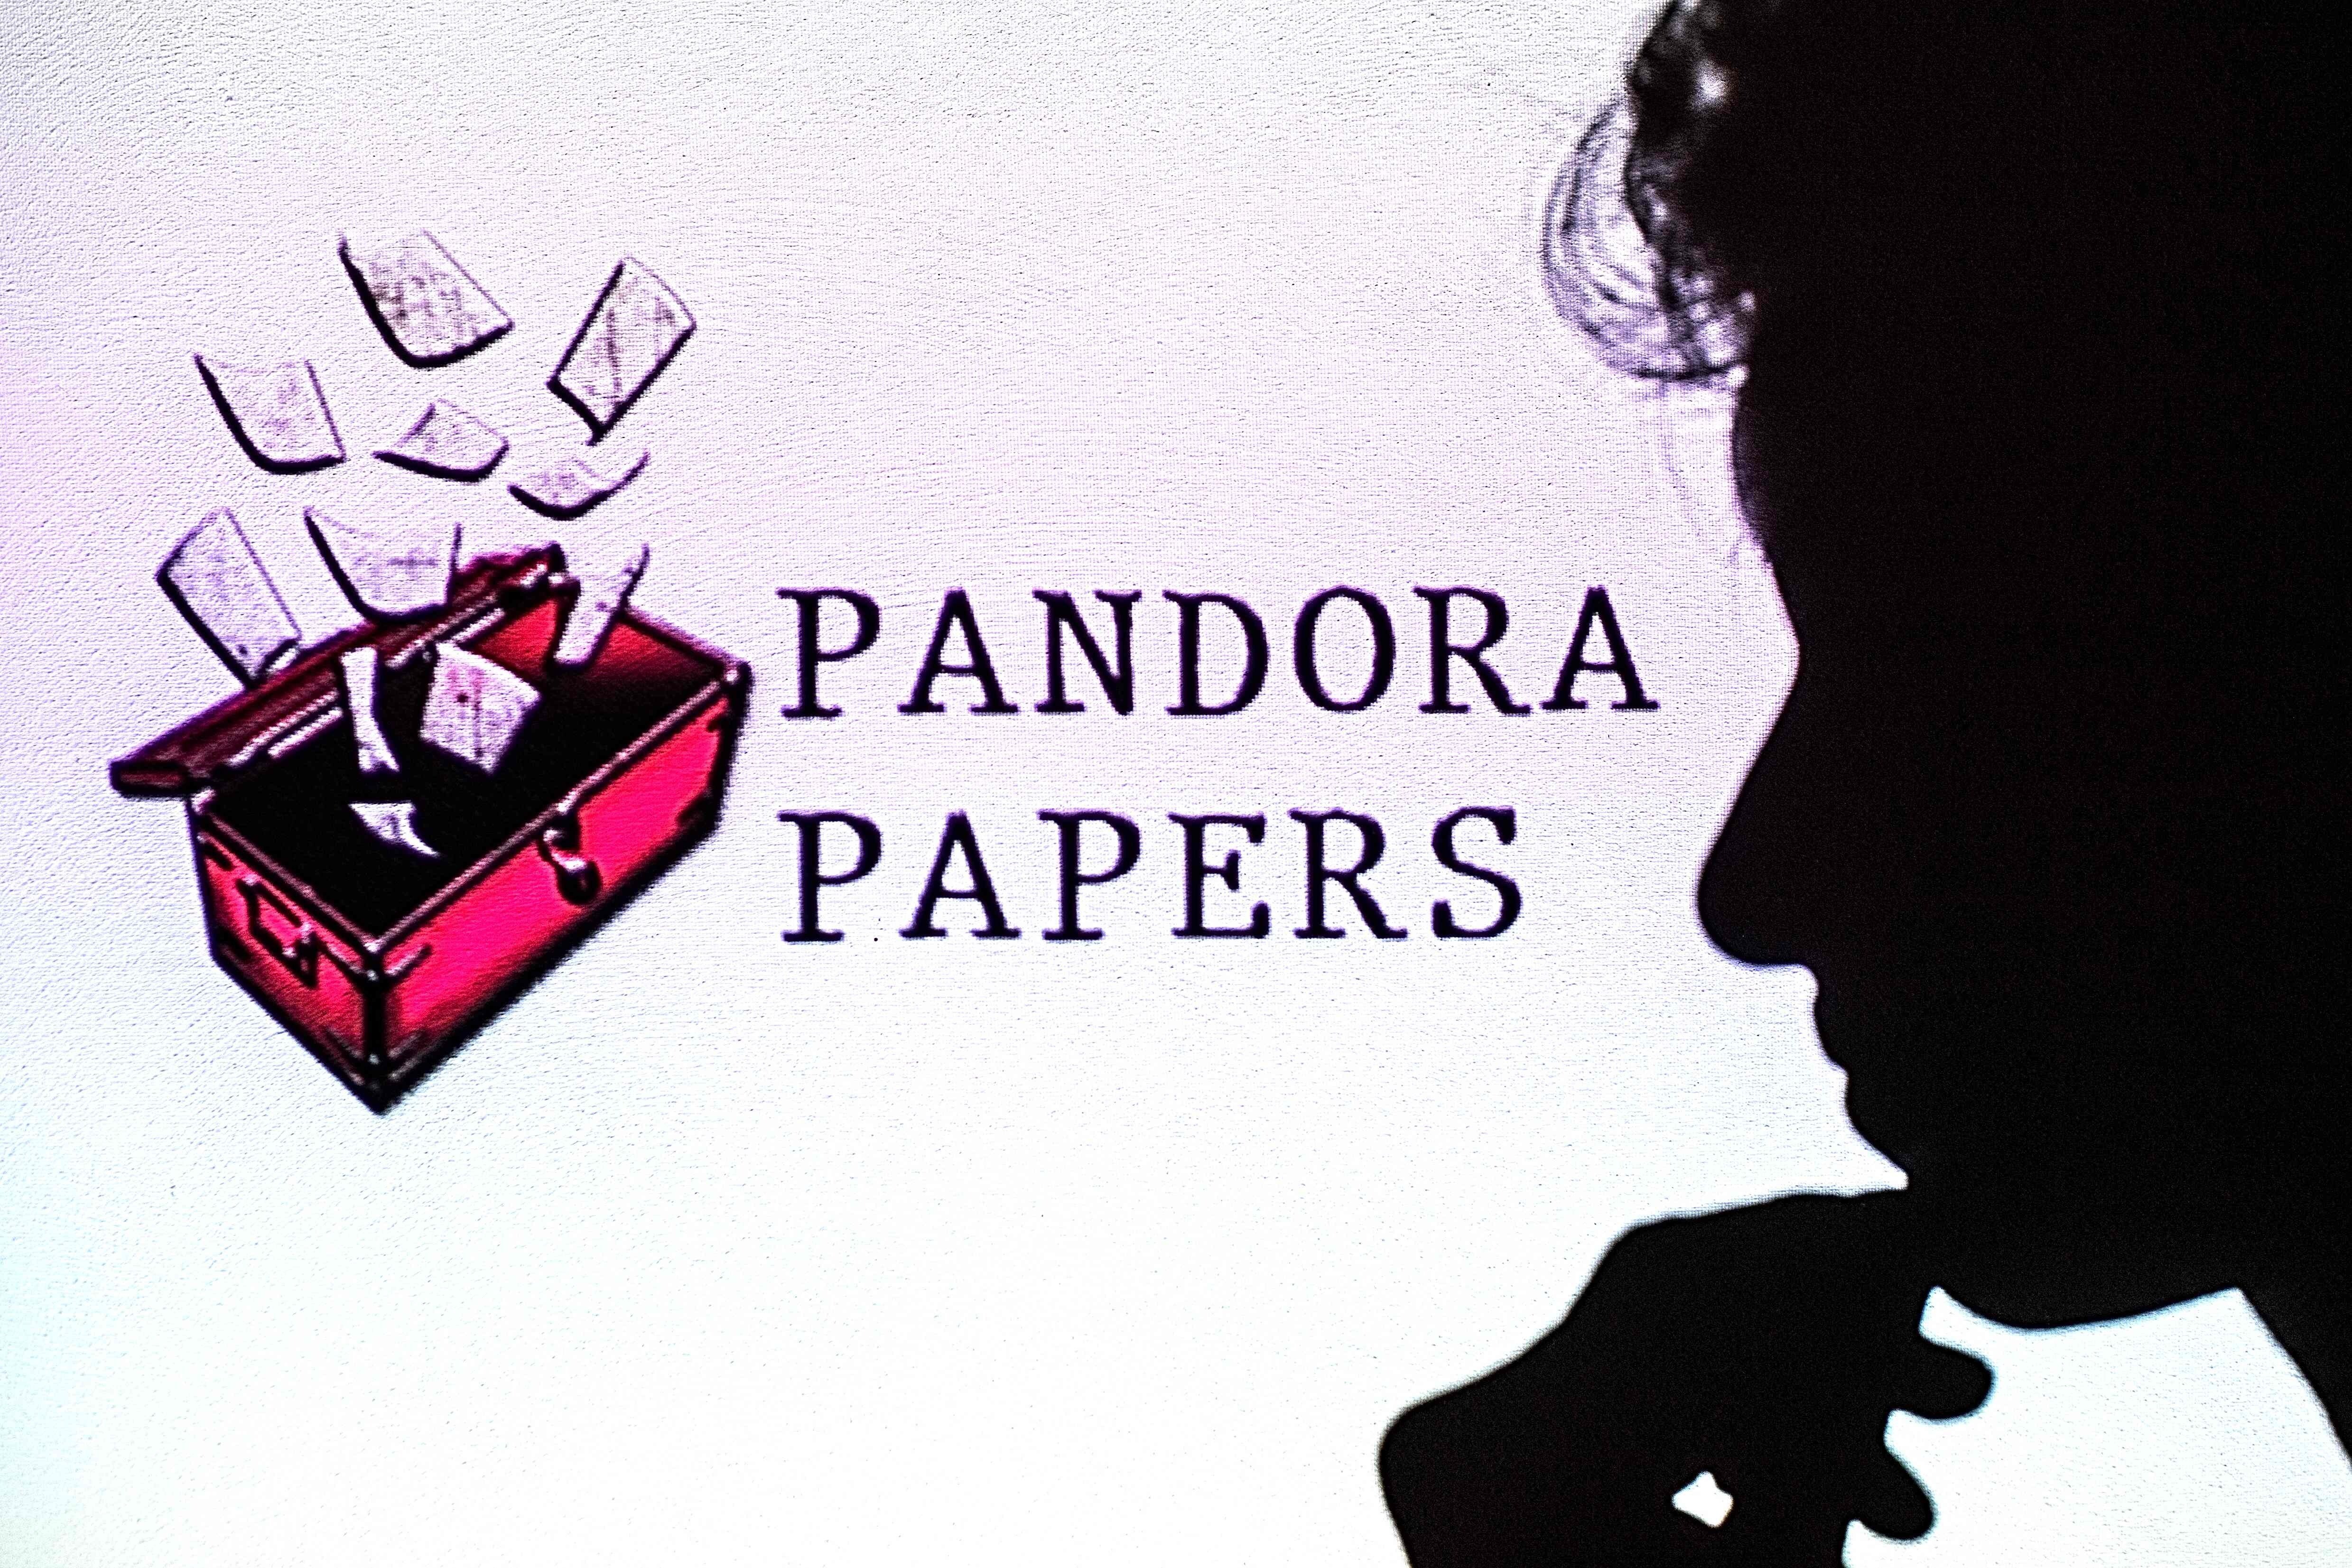 The “Pandora Papers” leak involves some 11.9 million documents from 14 financial services companies around the world. Photo illustration: AFP